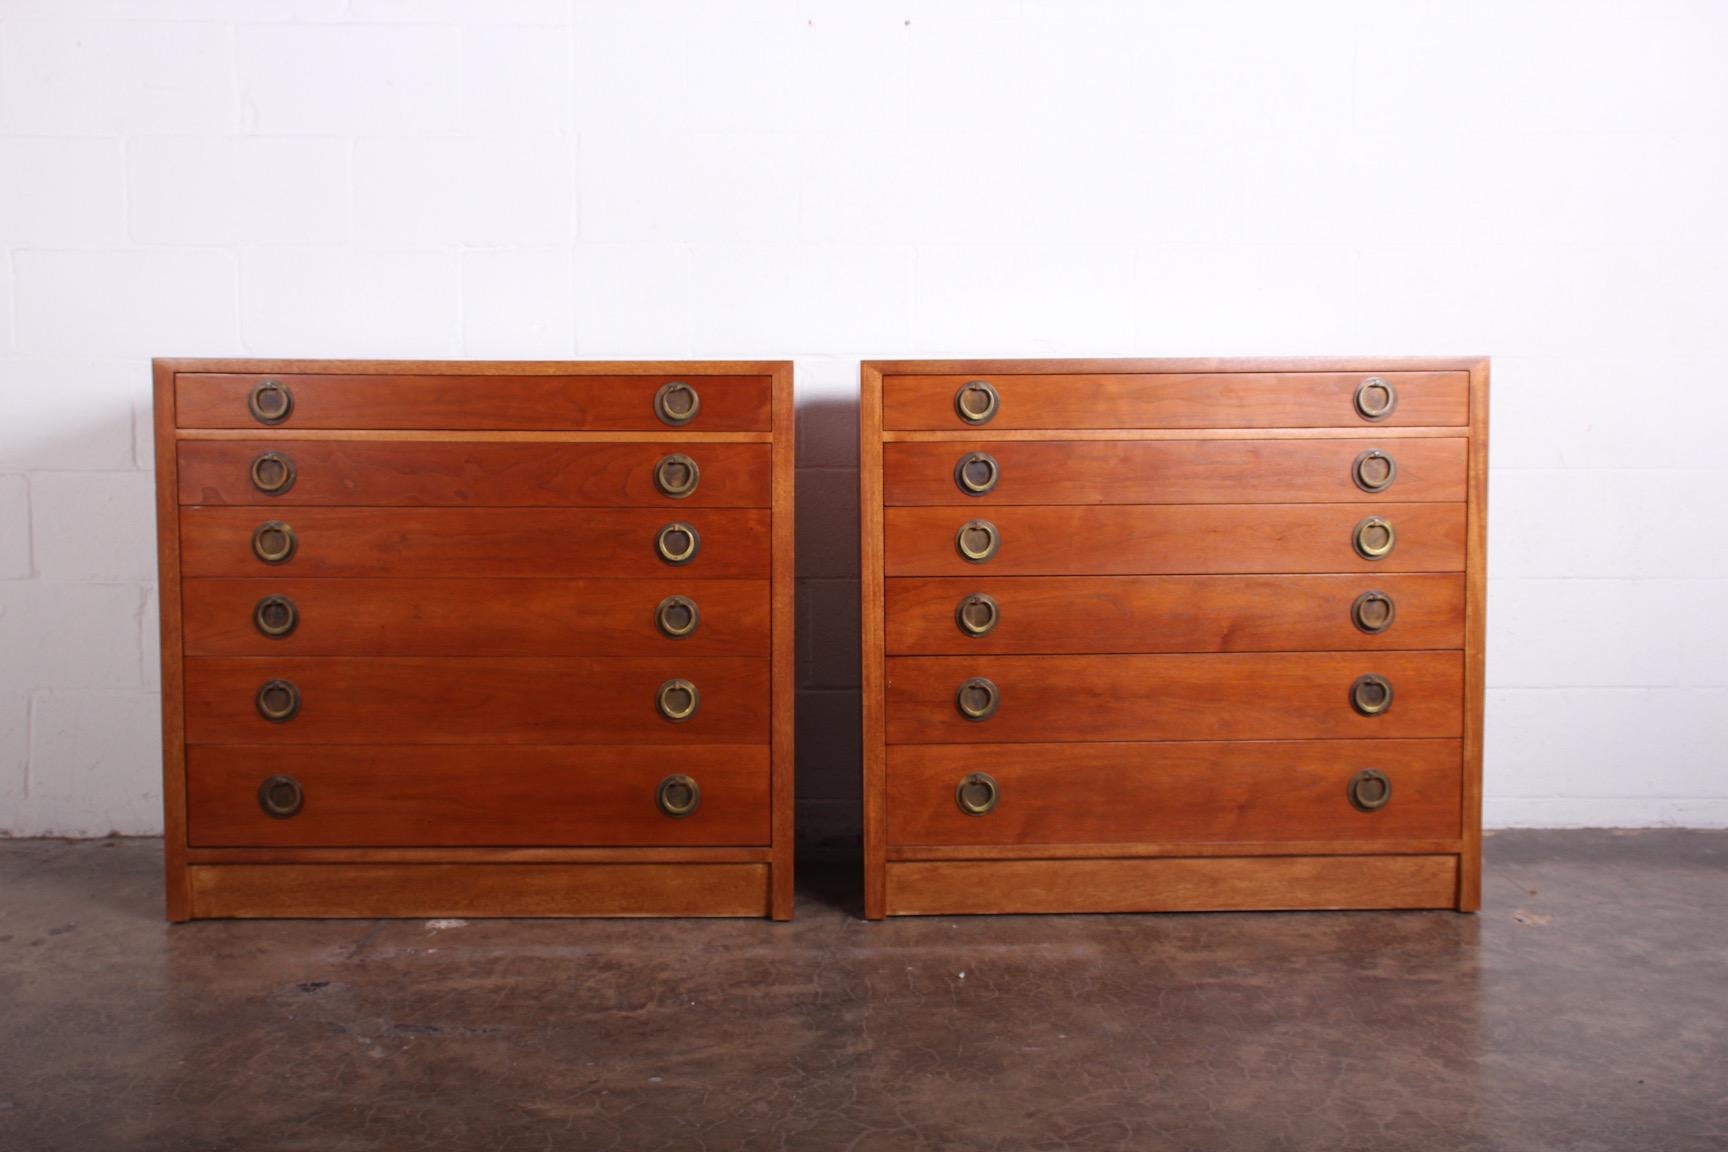 A pair of two tone dressers with brass hardware. Designed by Edward Wormley for Dunbar.